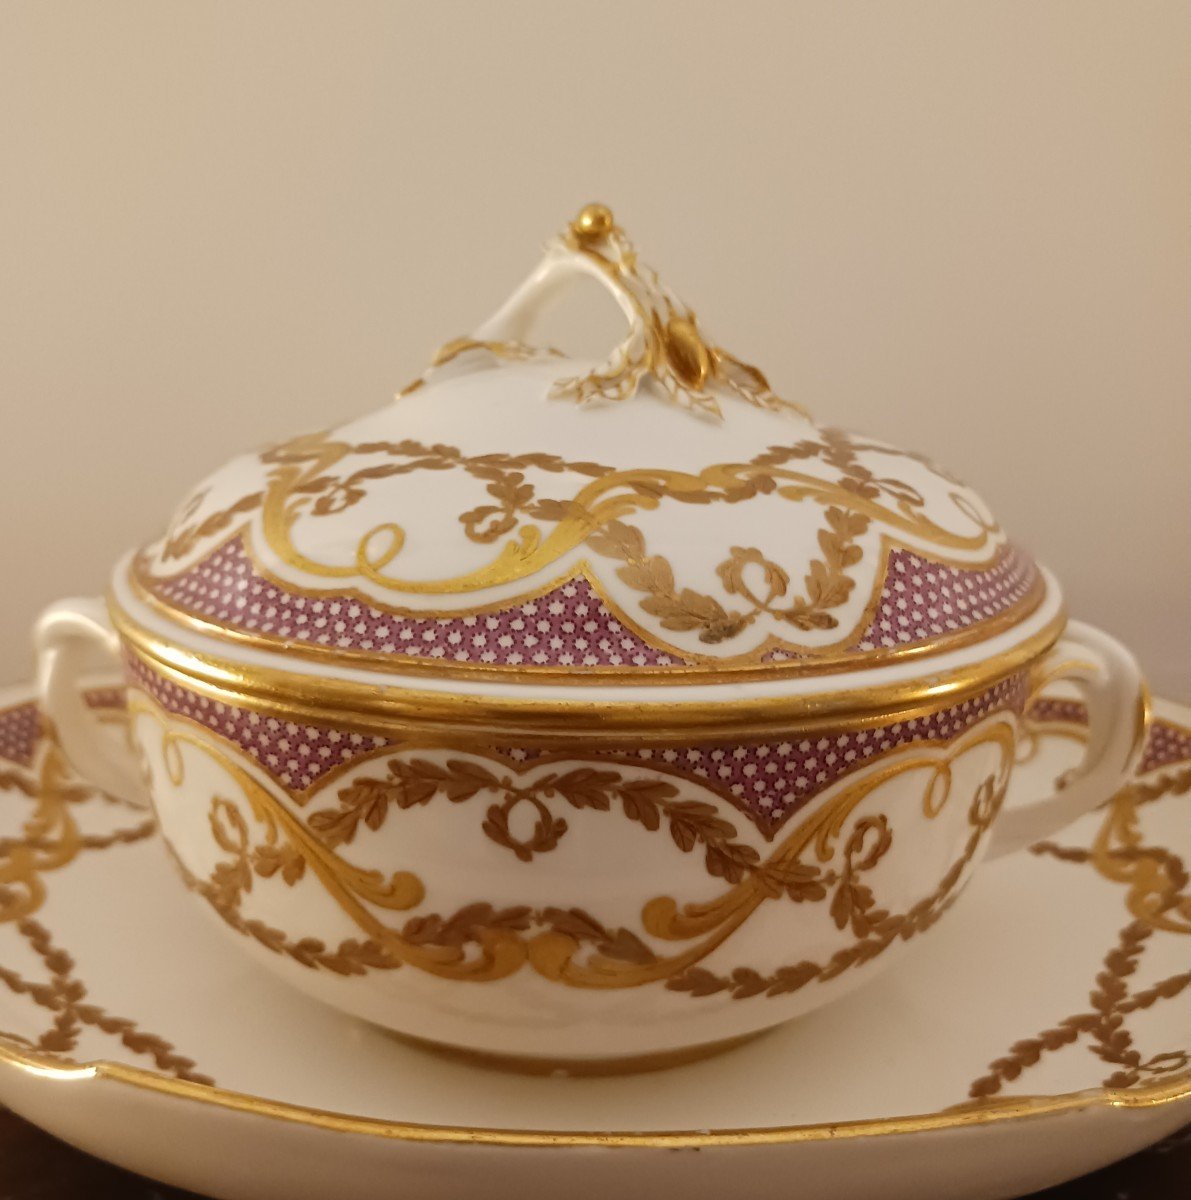 Manufacture Royale De Sèvres - Covered Bowl And Its Tray In Hard Porcelain - Taillandier Base - 2nd Size -photo-1